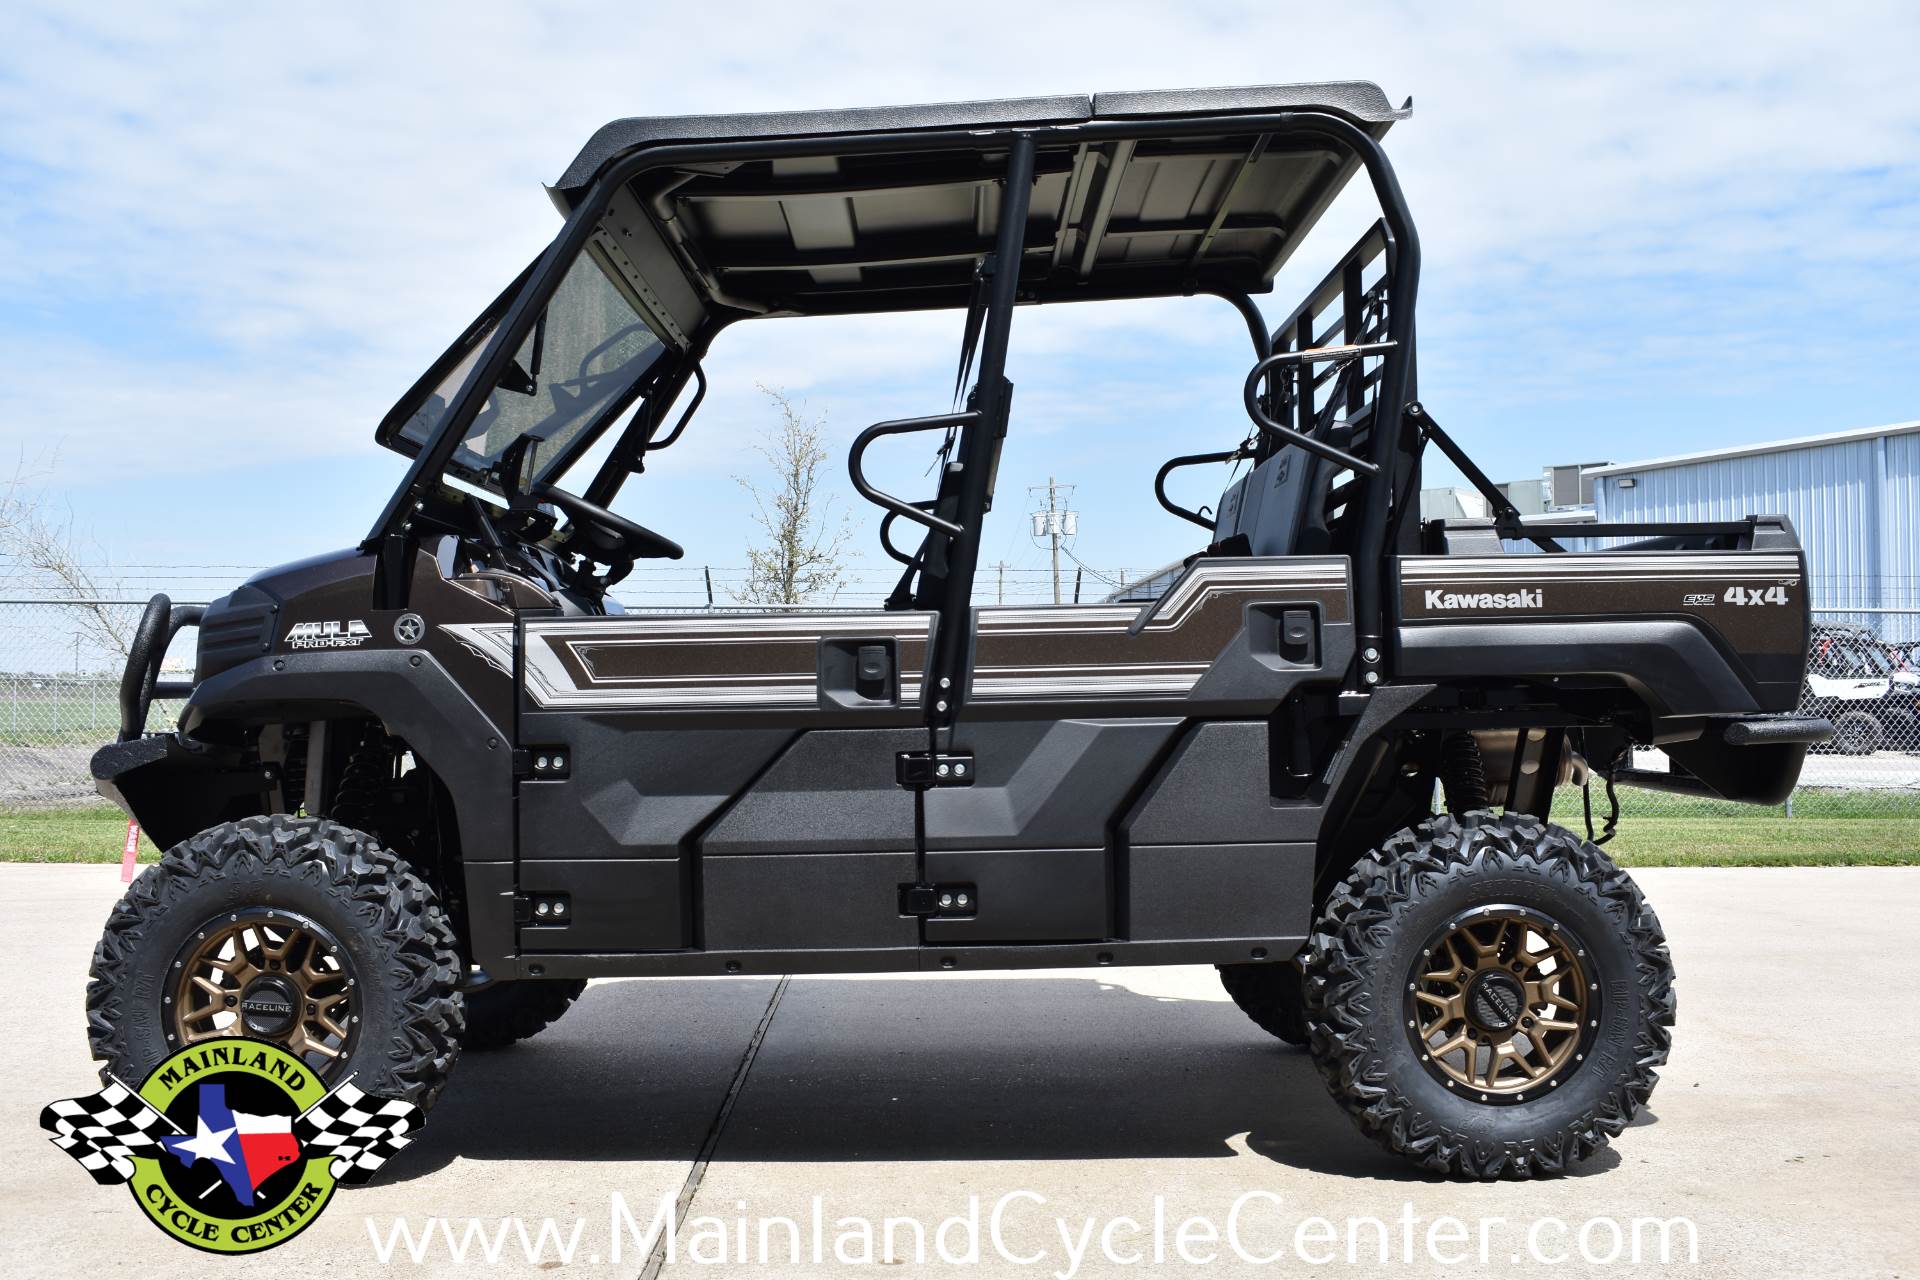 2019 Mule PRO-FXT Ranch Edition Mule PRO-FXT Ranch Edition CSTM17661 - Click for larger photo